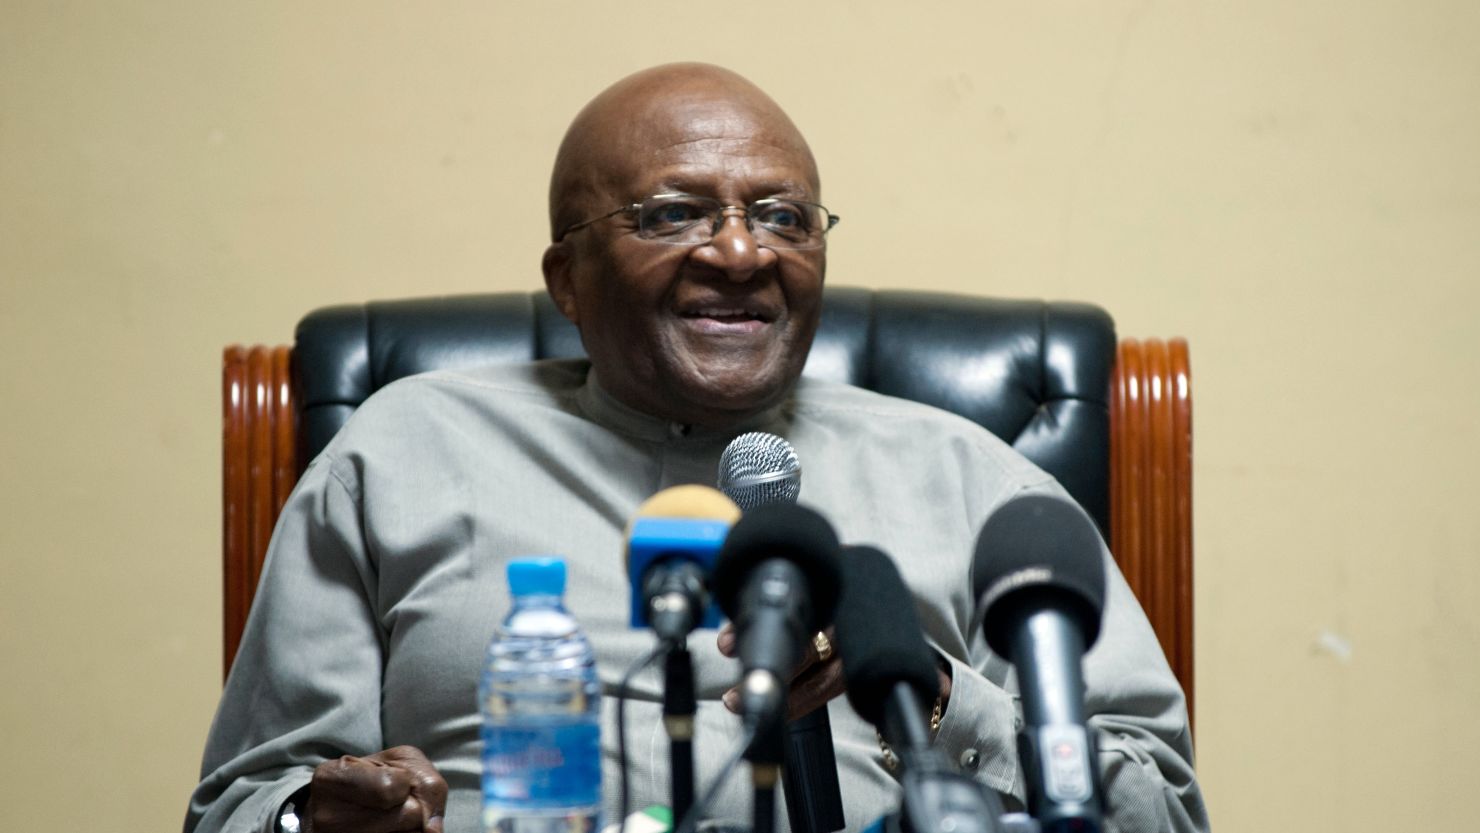 Archbishop Desmond Tutu, pictured here on July 6, 2012, will not attend because he does not want to share a platform with Blair.